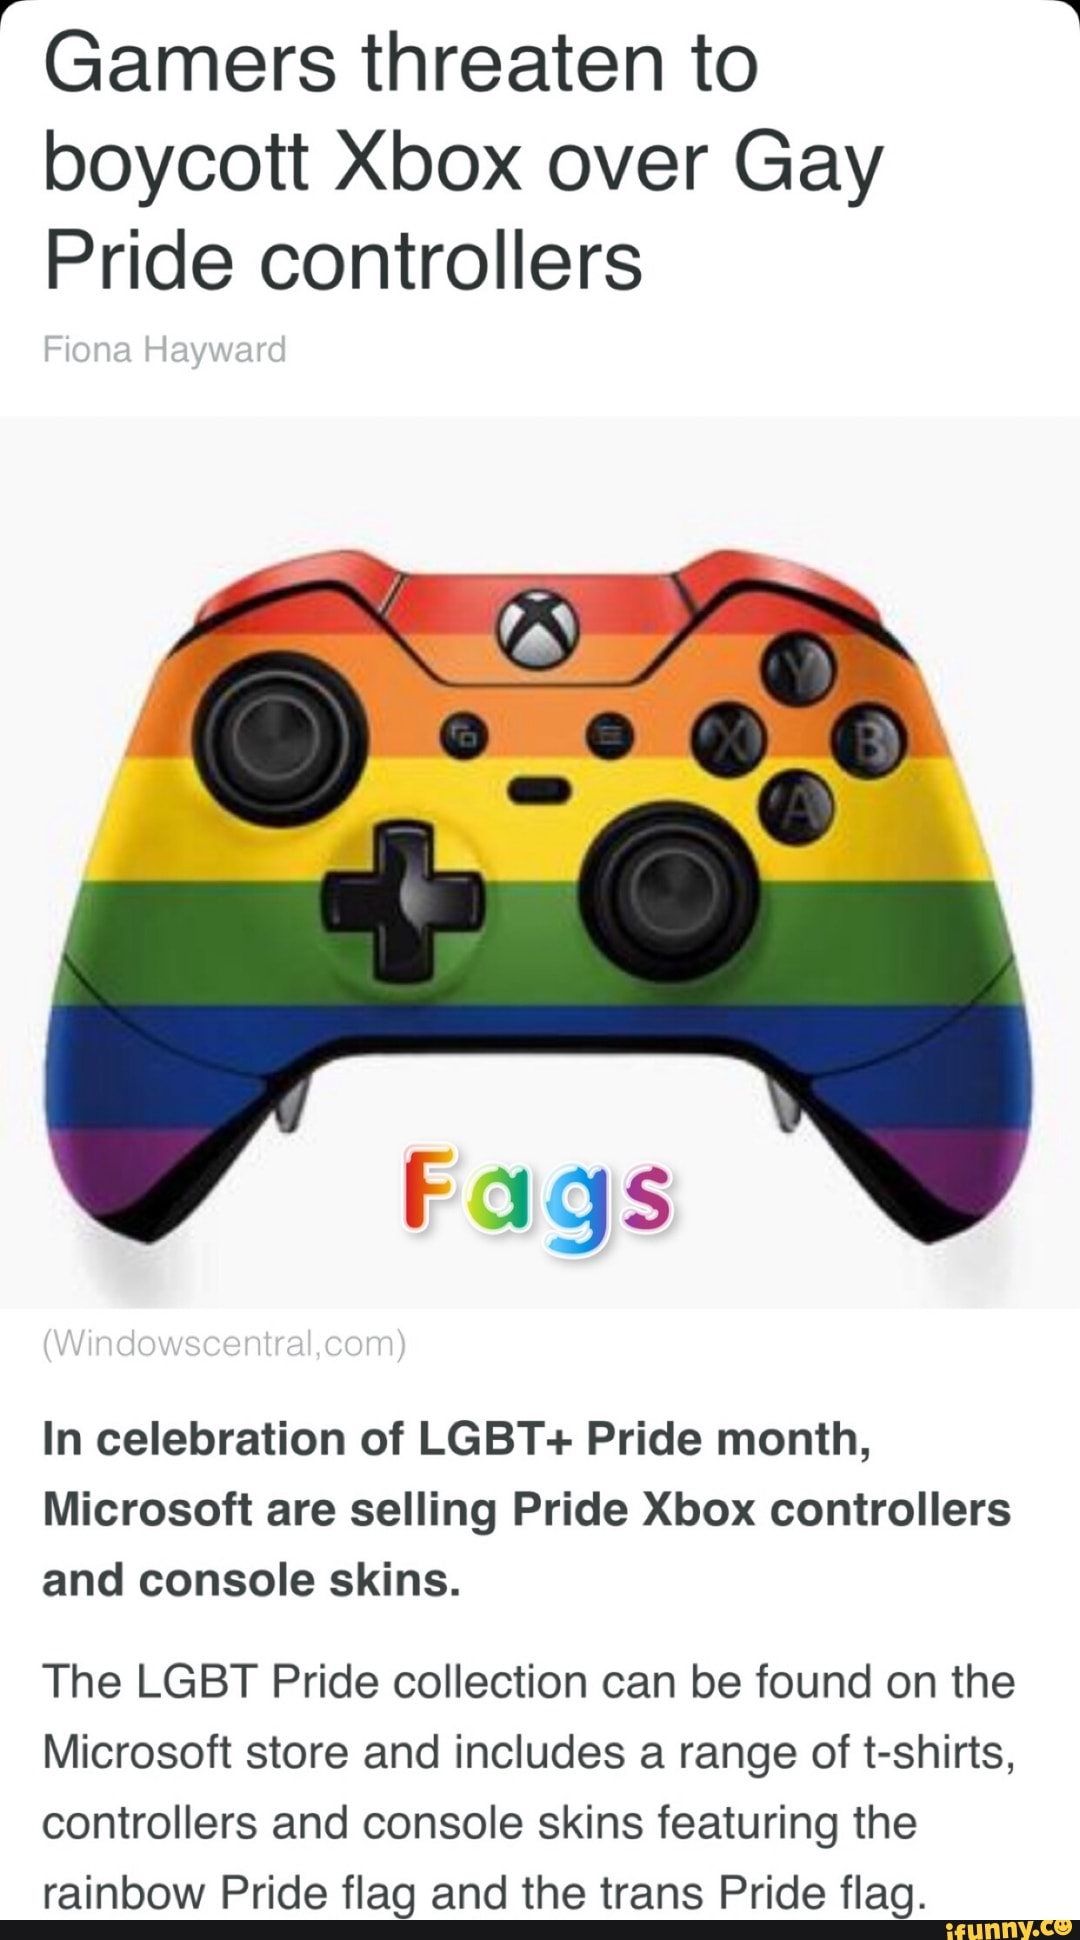 boycott Xbox over Gay Pride controllers In celebration of LGBT+ Pride month...